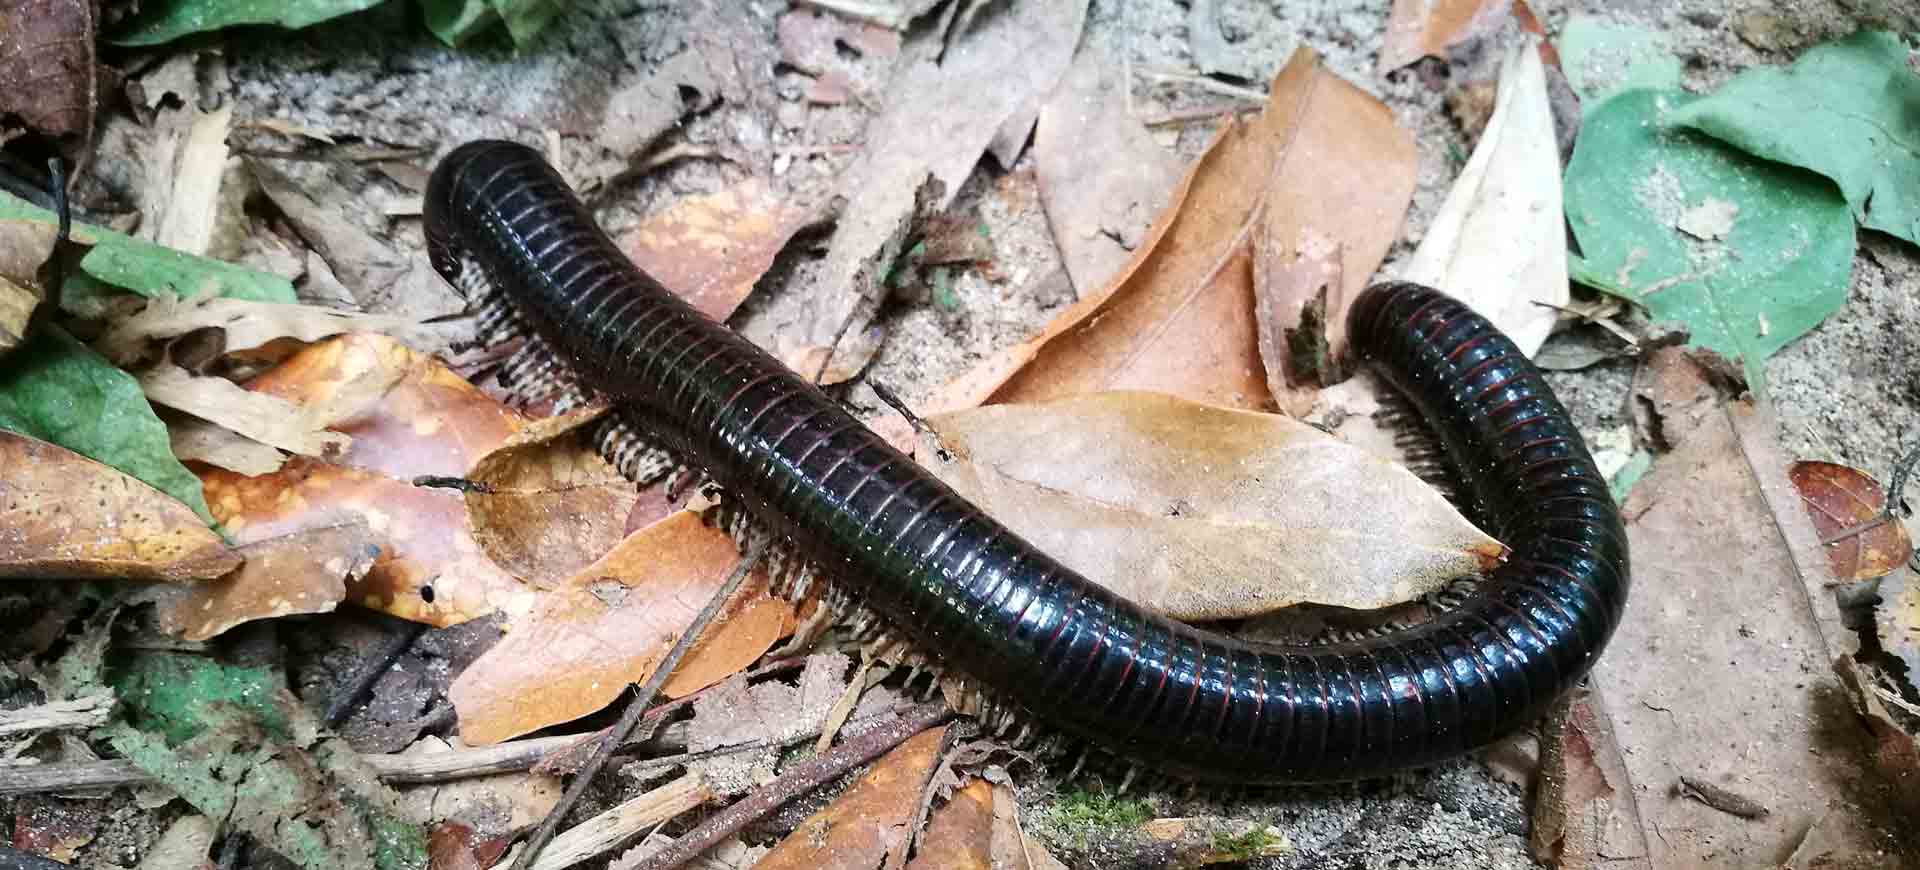 millipede pest control central san diego county